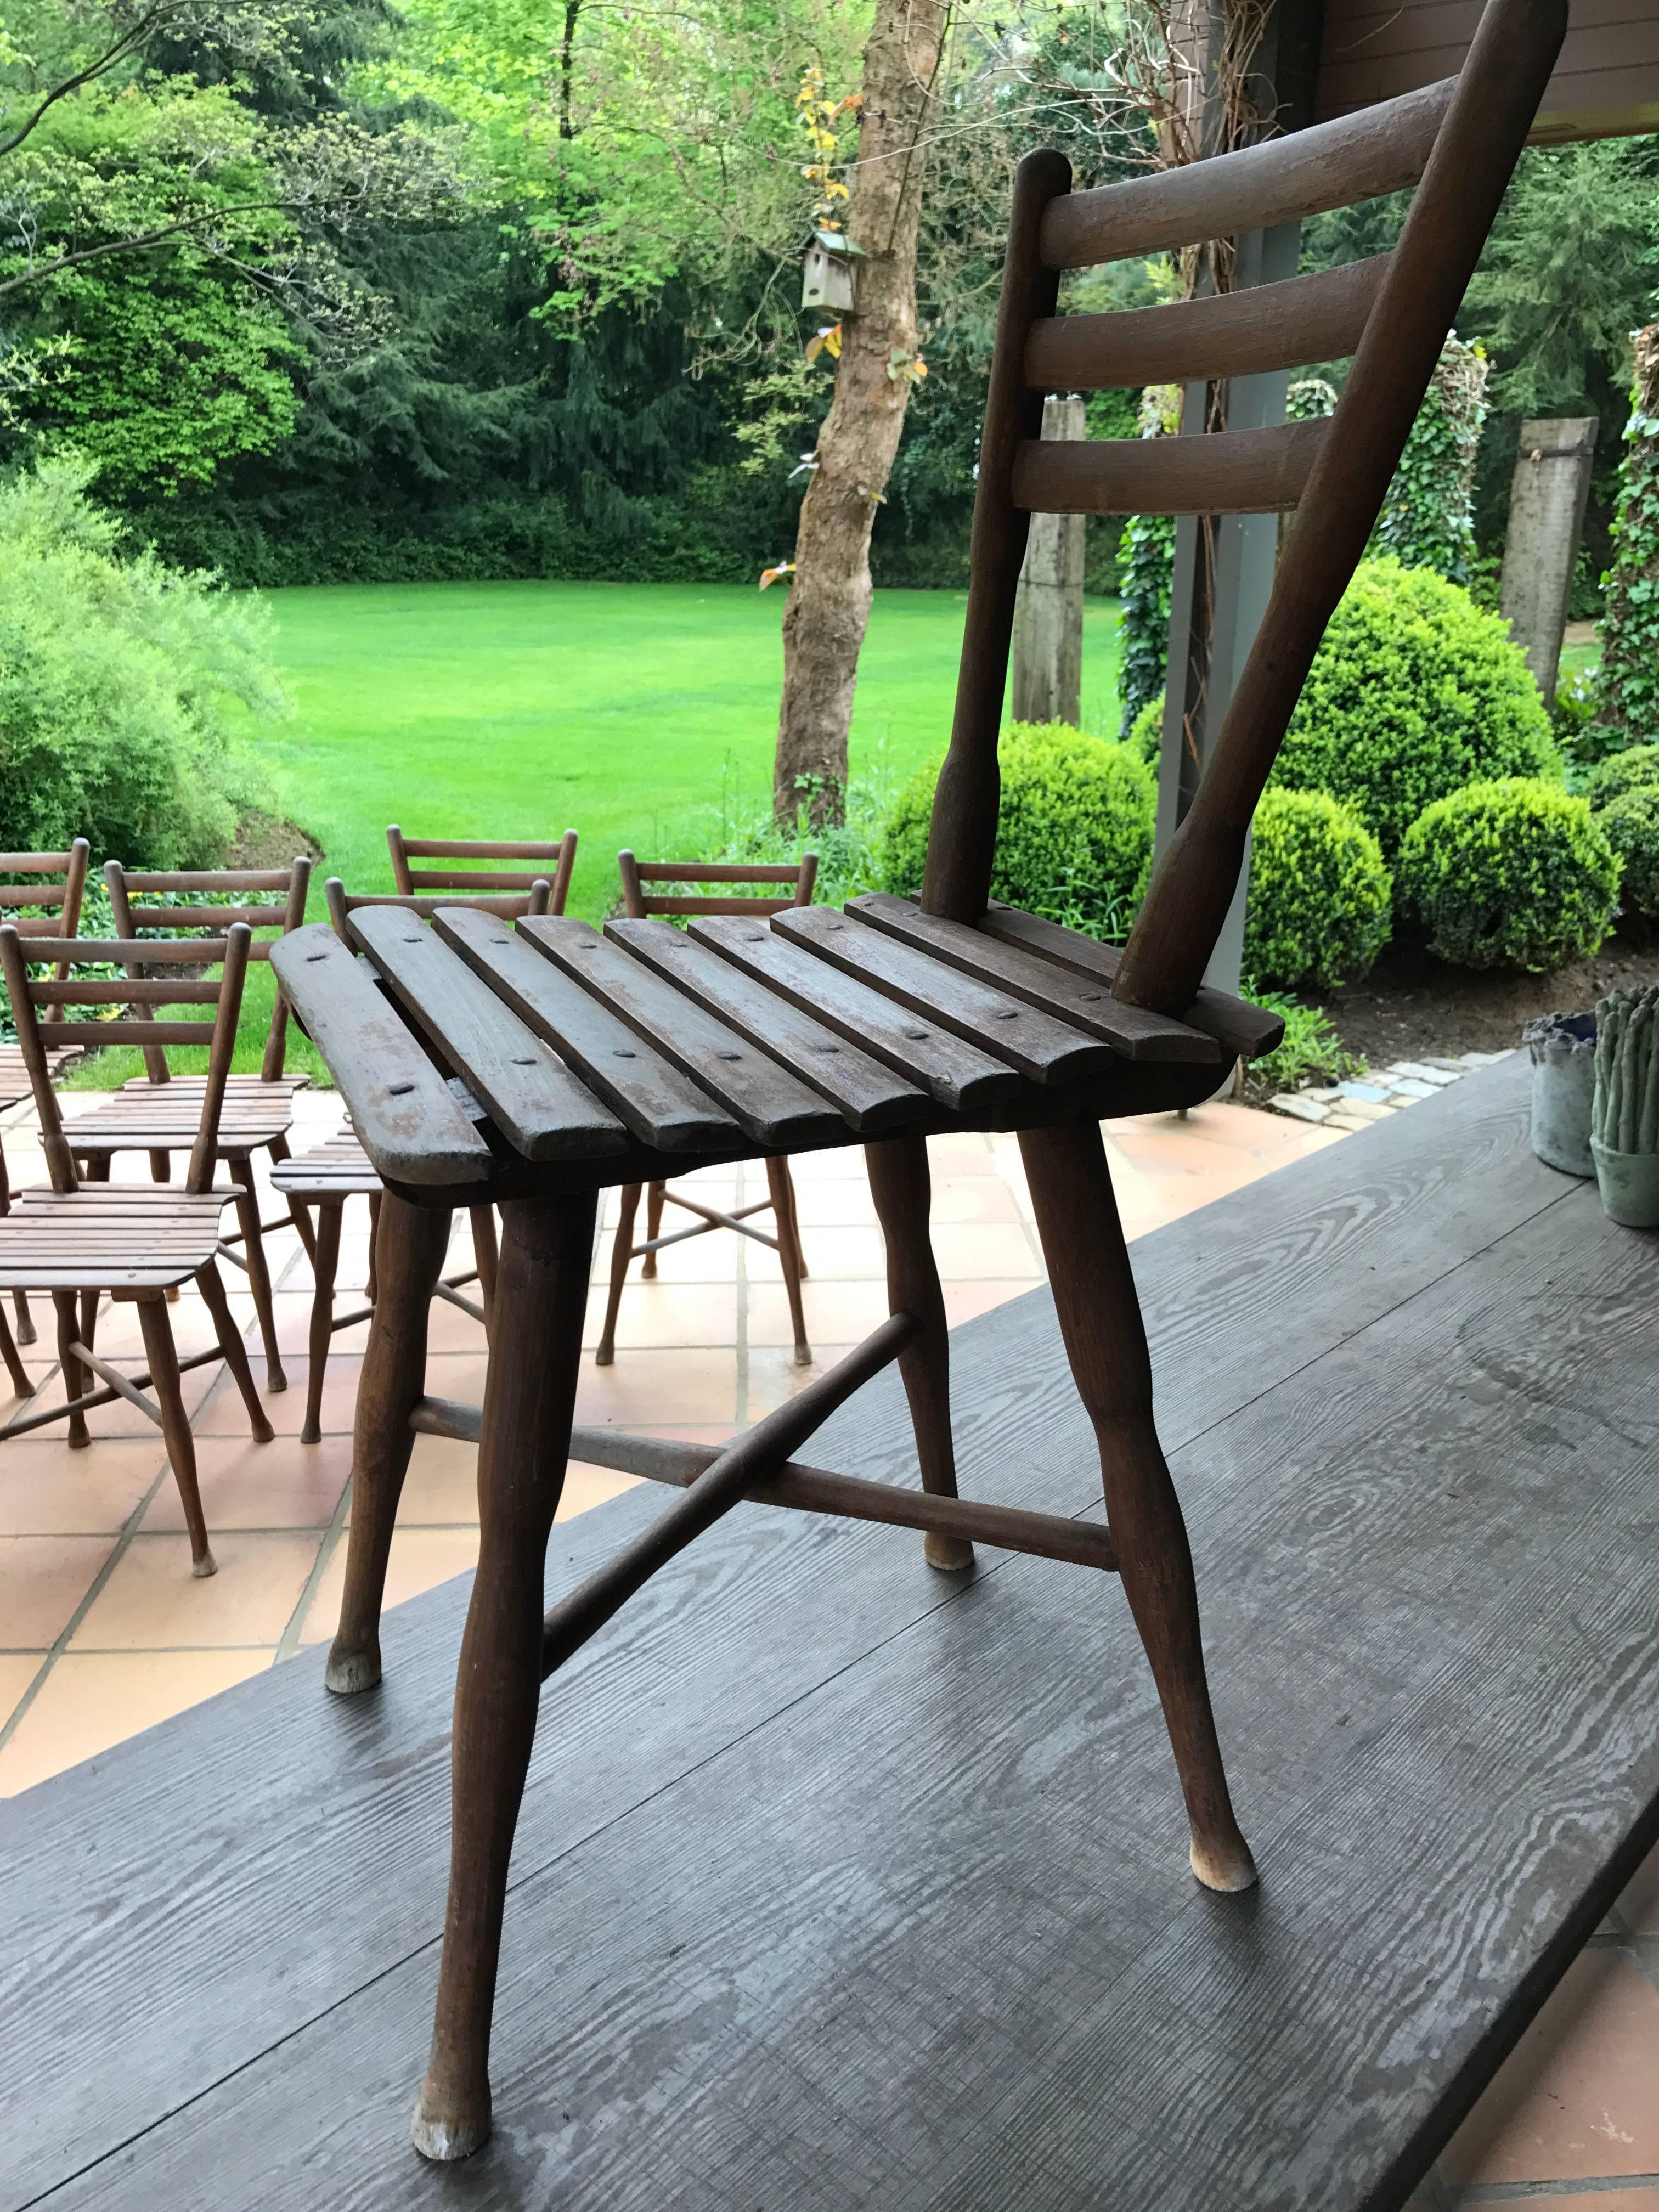 Rare collection of garden chairs made by
Michael Thonet
12 chairs
All stamped Thonet Austria
Pedigree: Malloya Palace Hotel Switzerland
First interior by Thonet
Catalogue 1904
Thonet nr 8,5
Possibility to buy 6 at half the price


Originally painted